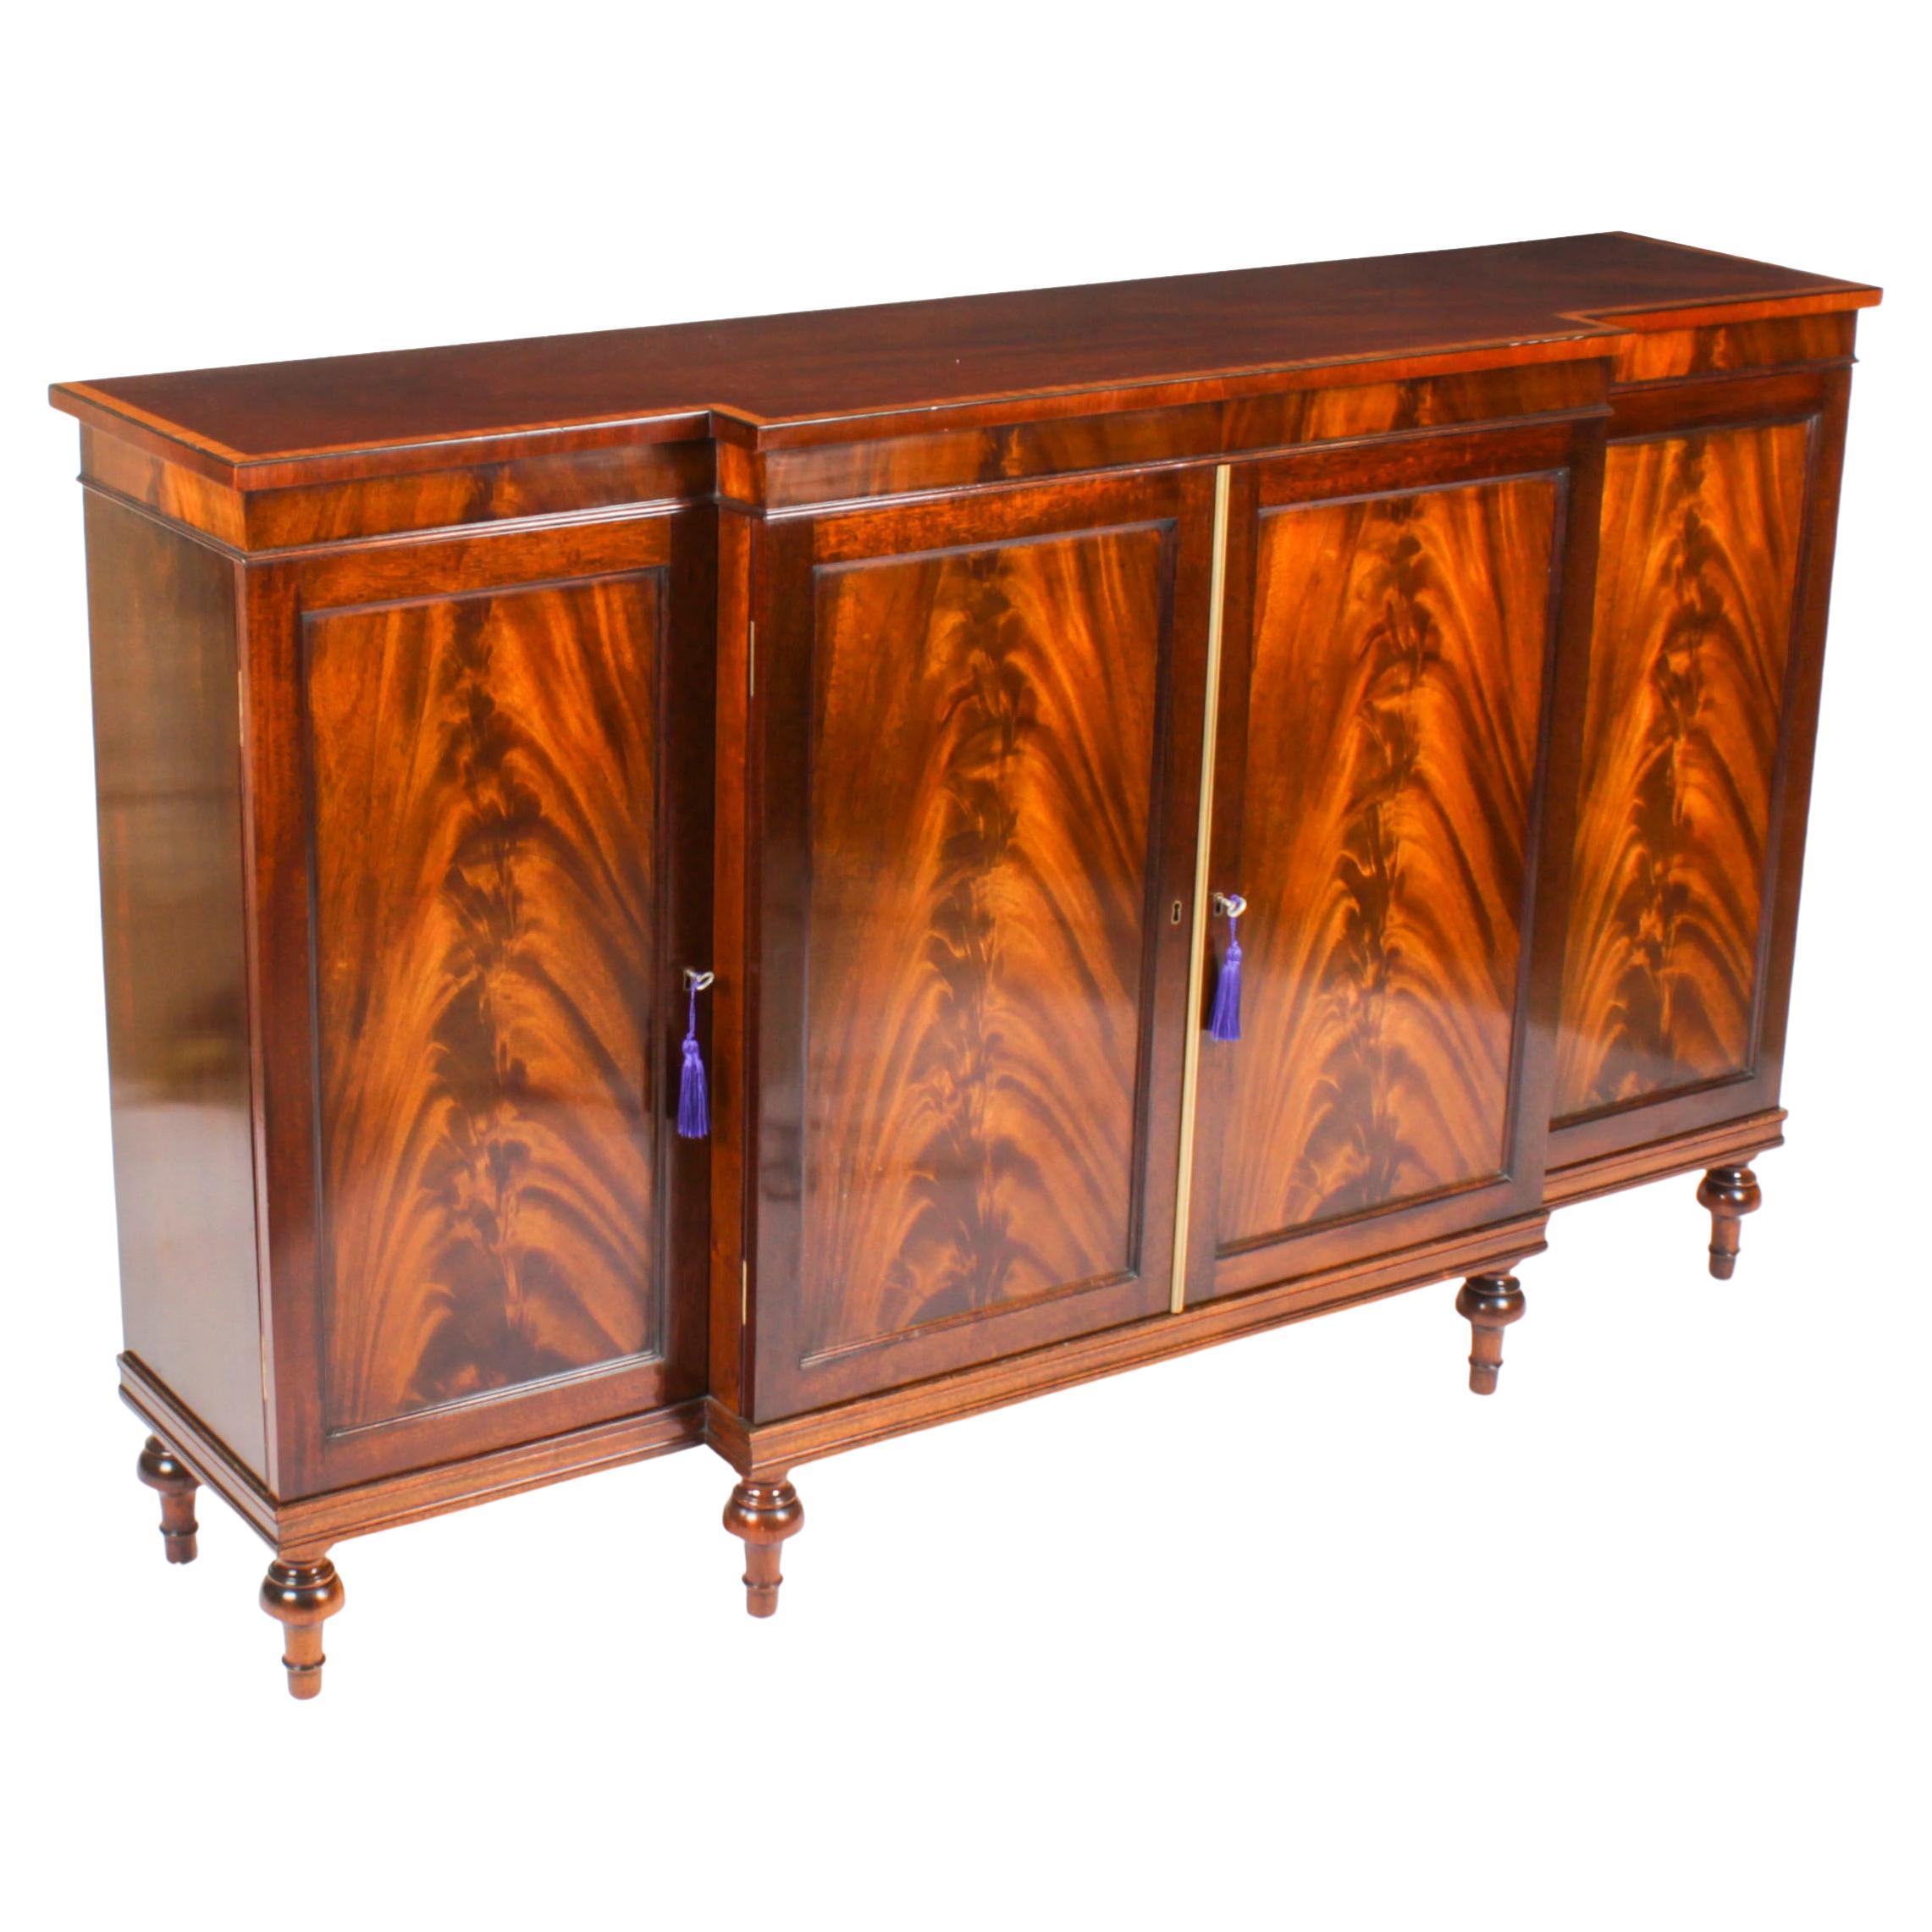 Vintage Flame Mahogany Sideboard by William Tillman 20th C